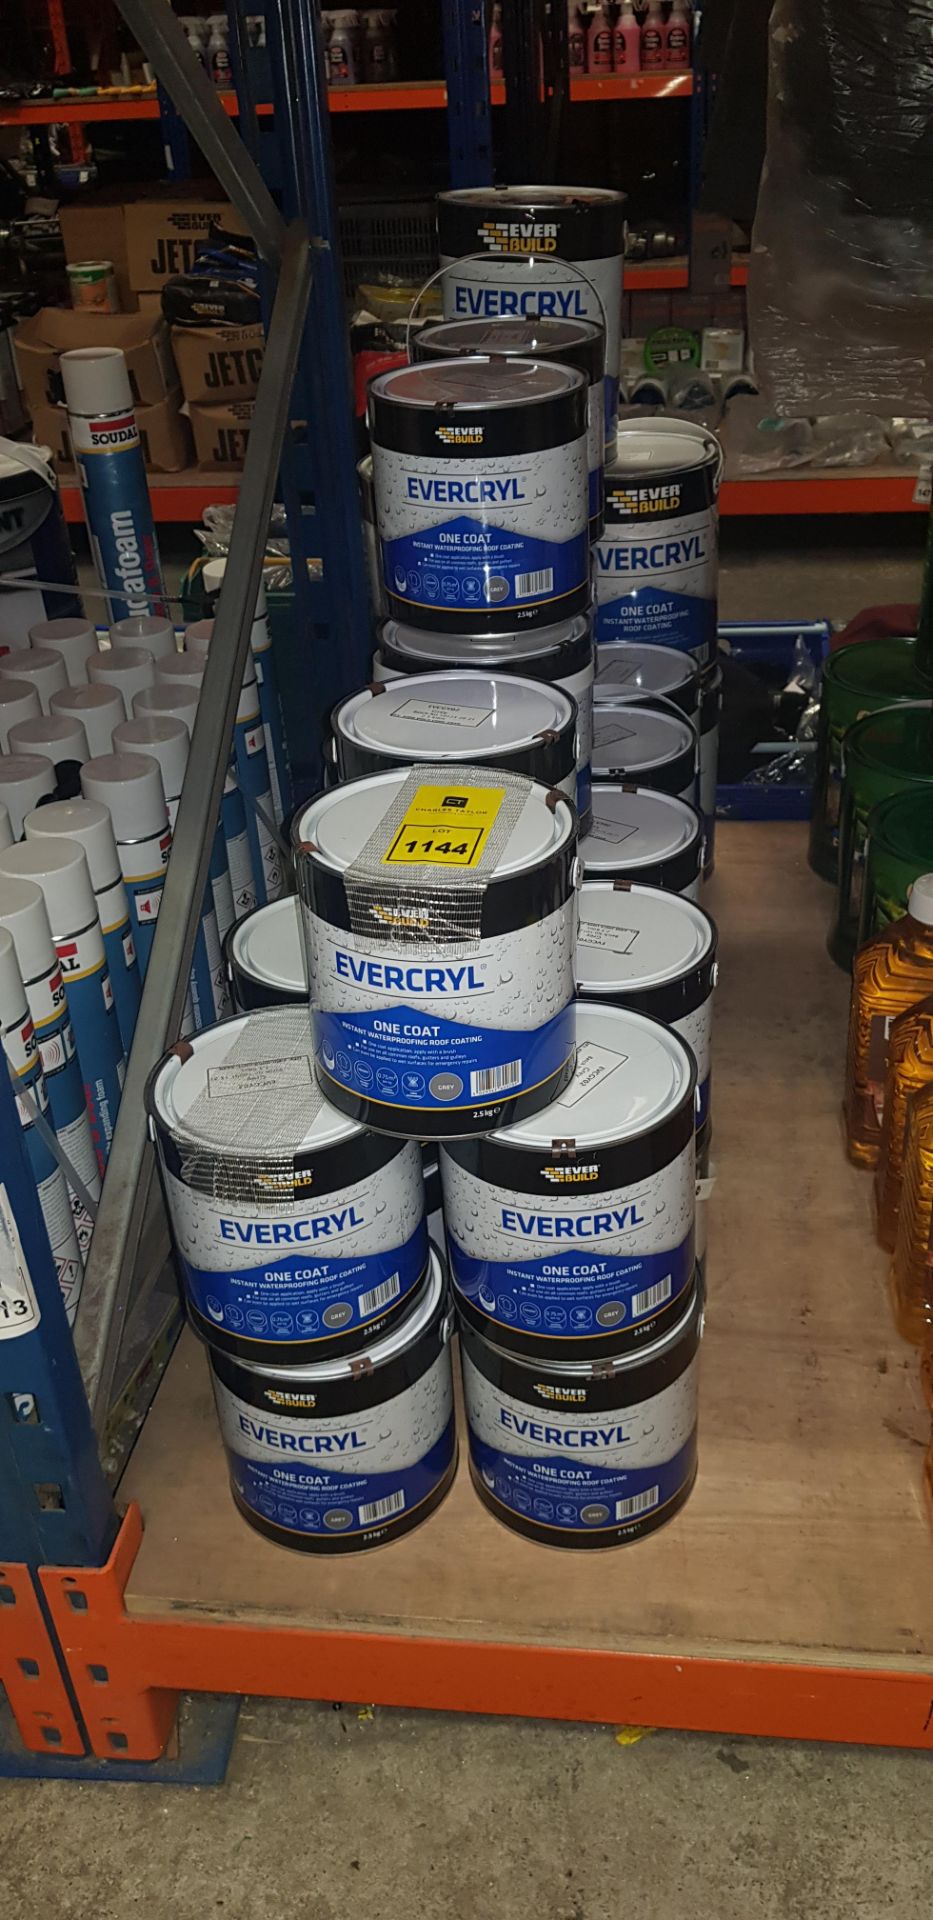 32 X BRAND NEW EVERBUILD EVERCRYL INSTANT (ONE COAT) WATERPROOF ROOF COATING - IN SIZES 2.5KG & 5KG